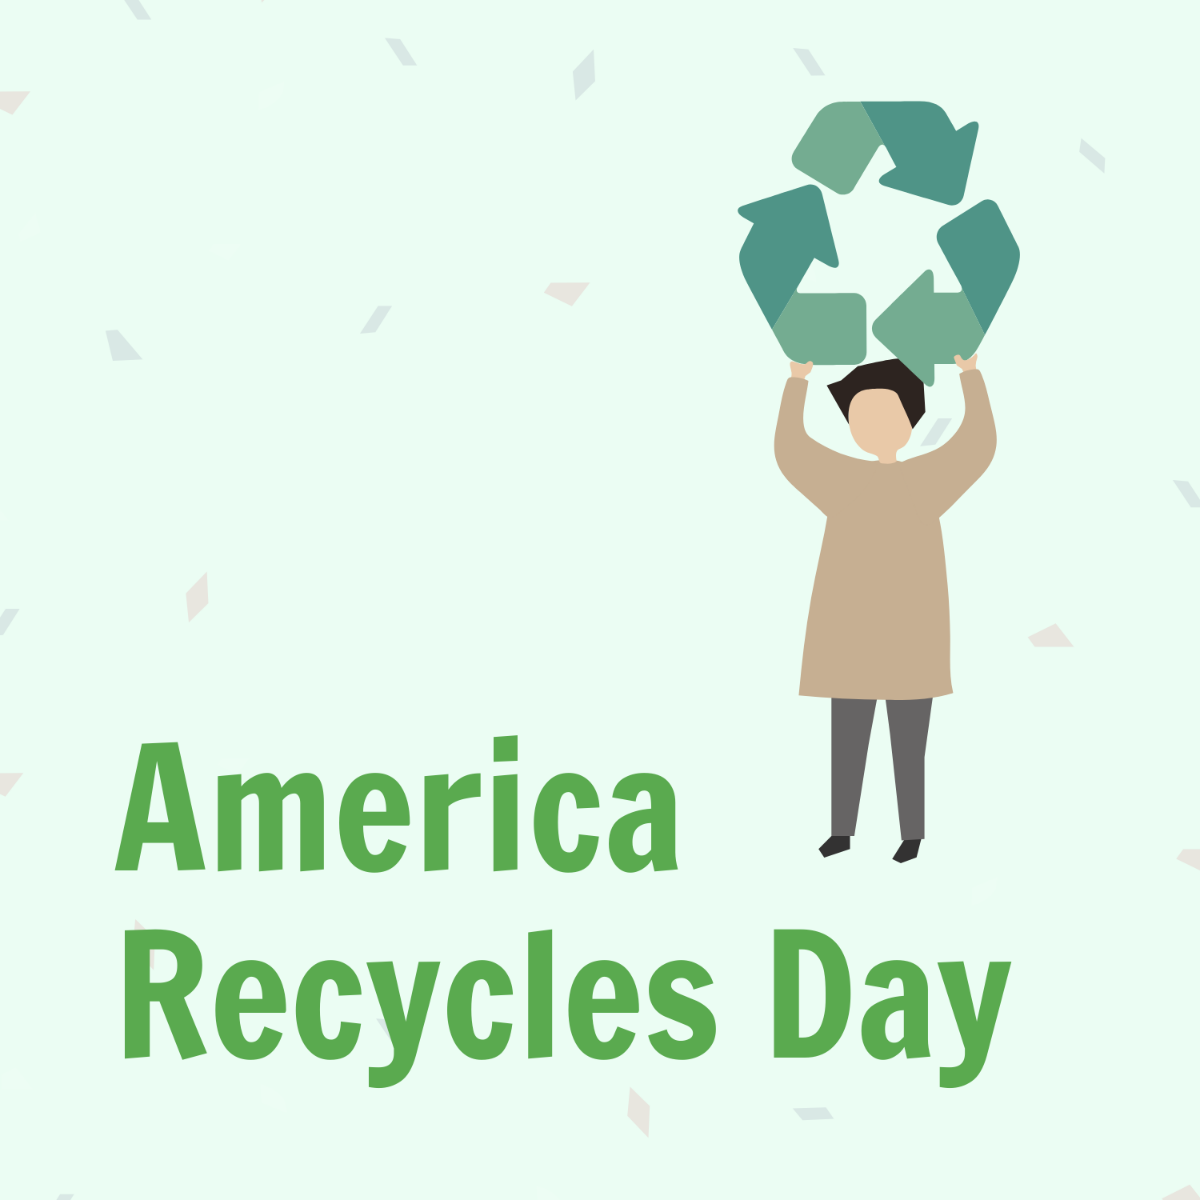 Free America Recycles Day Illustration Template